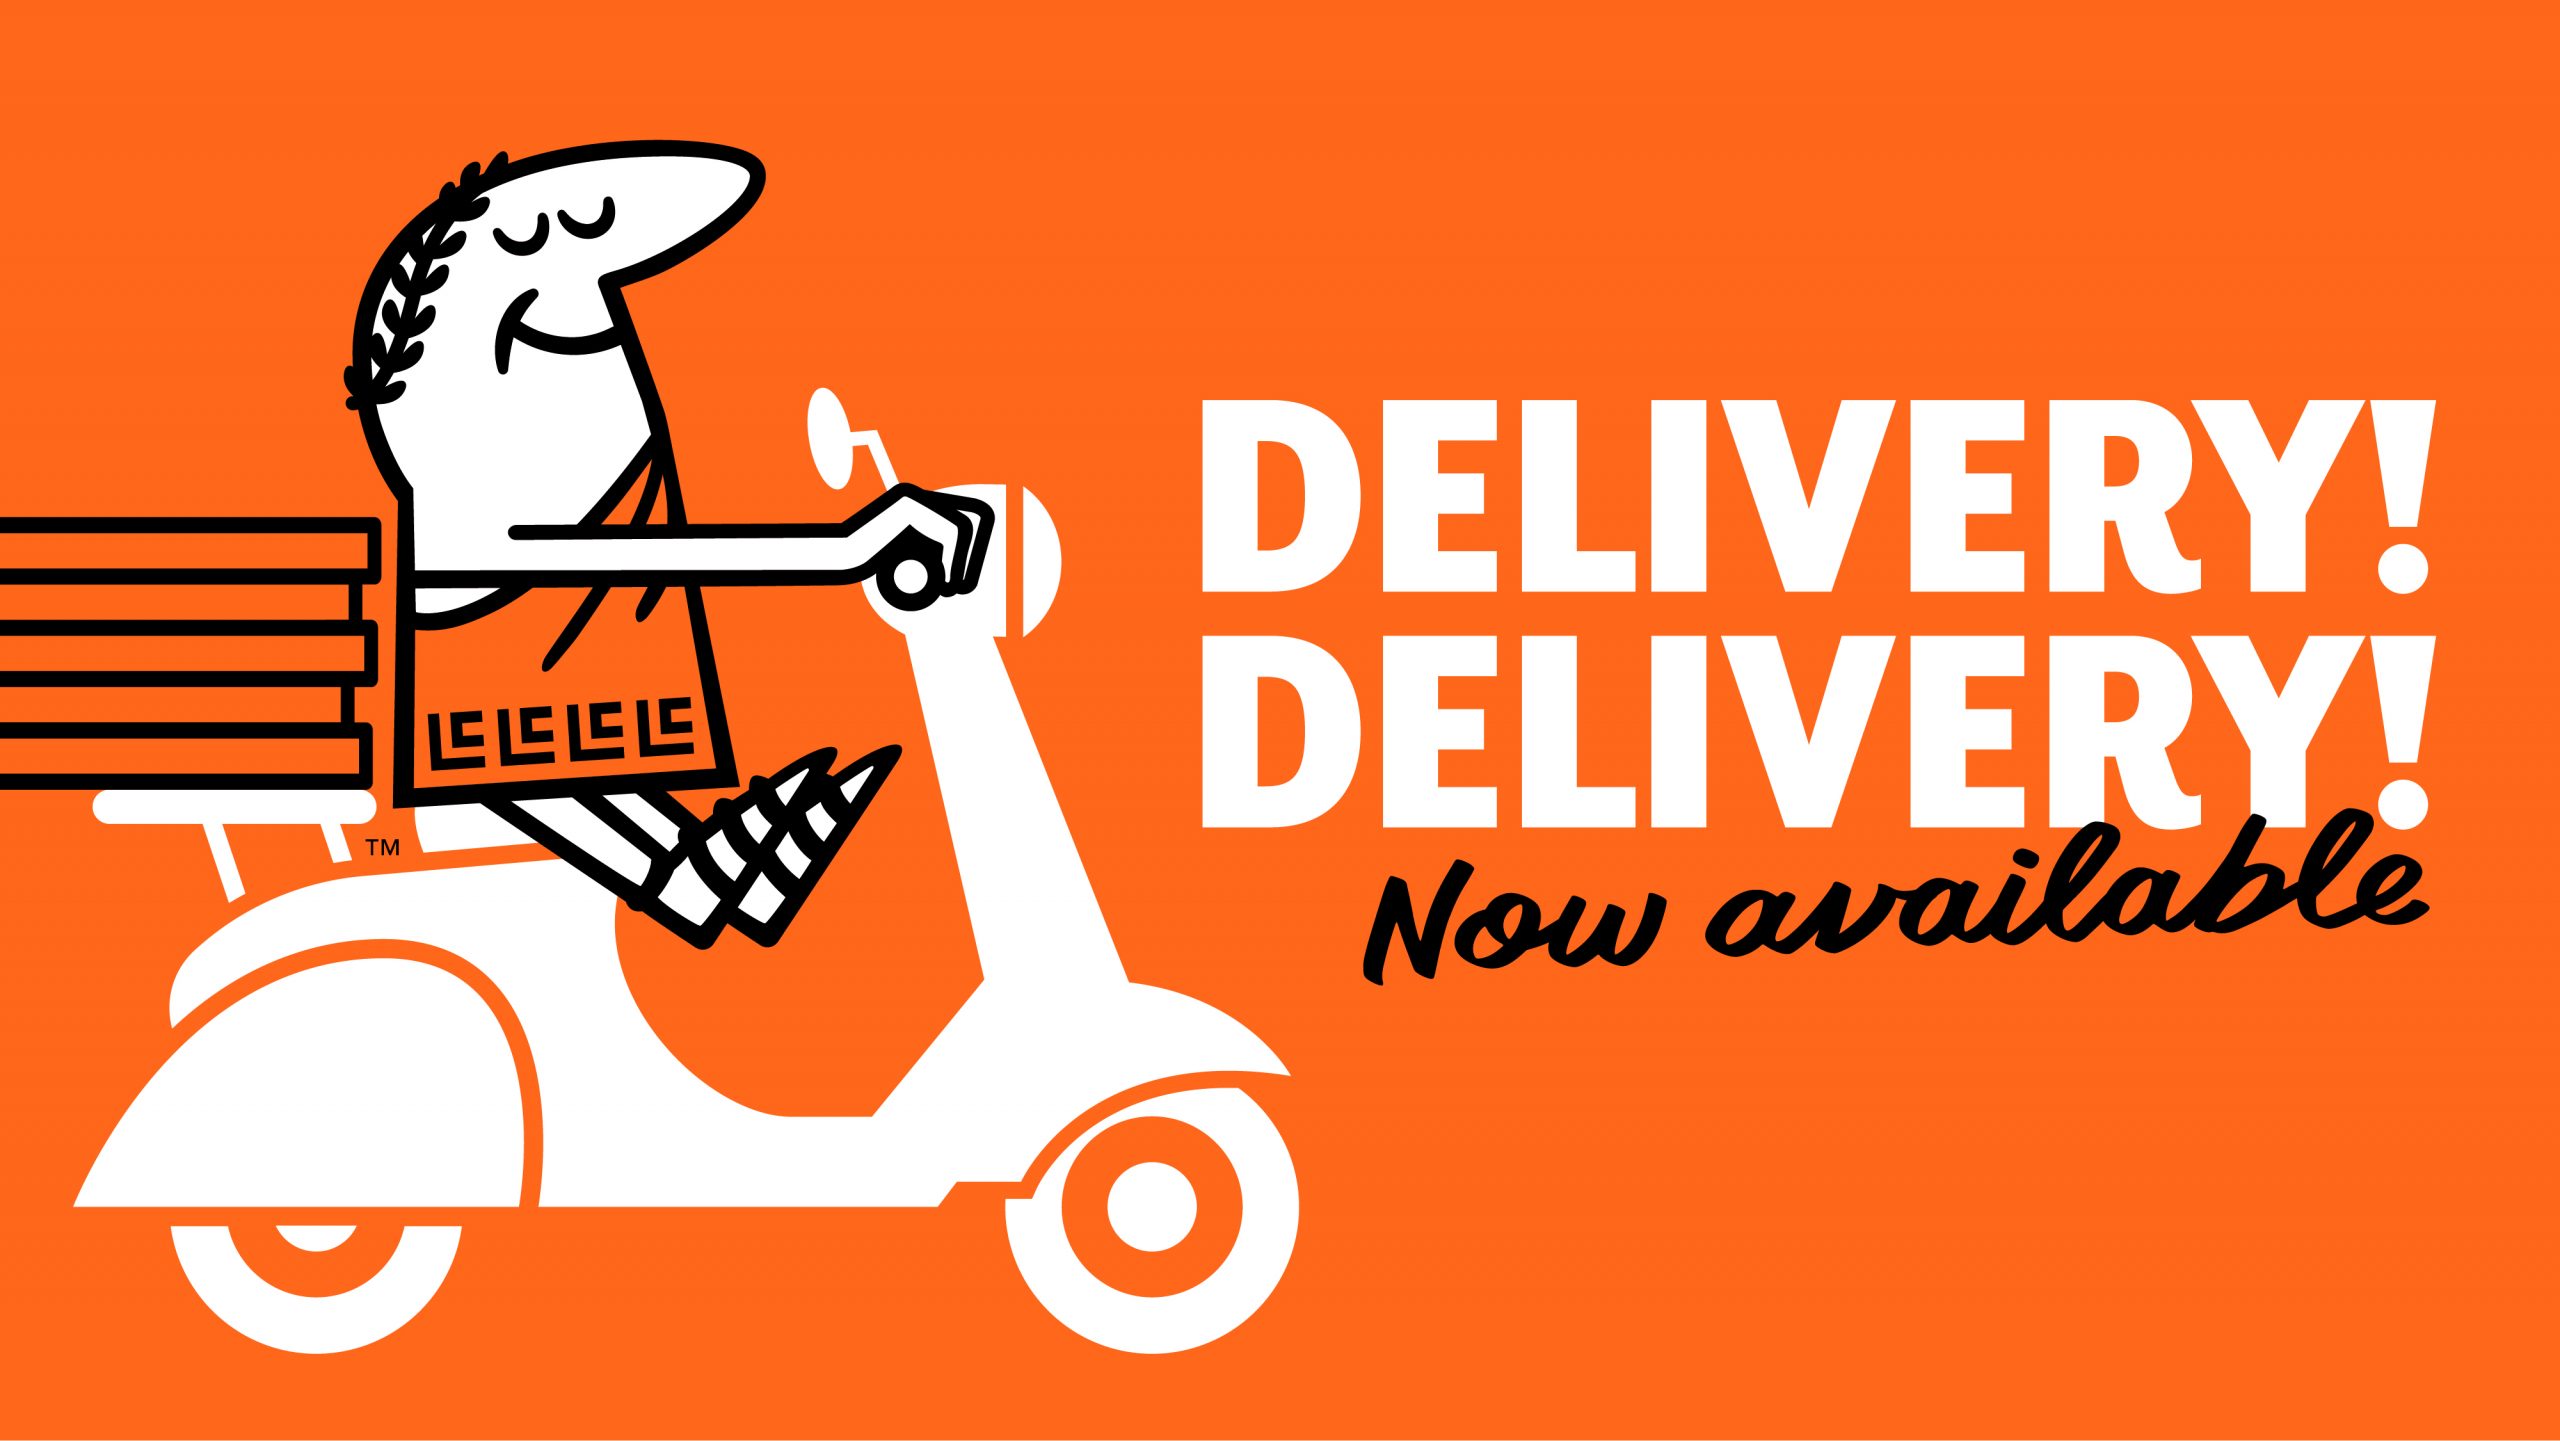 Little Caesars® Pizza: Best Value Delivery and Carryout